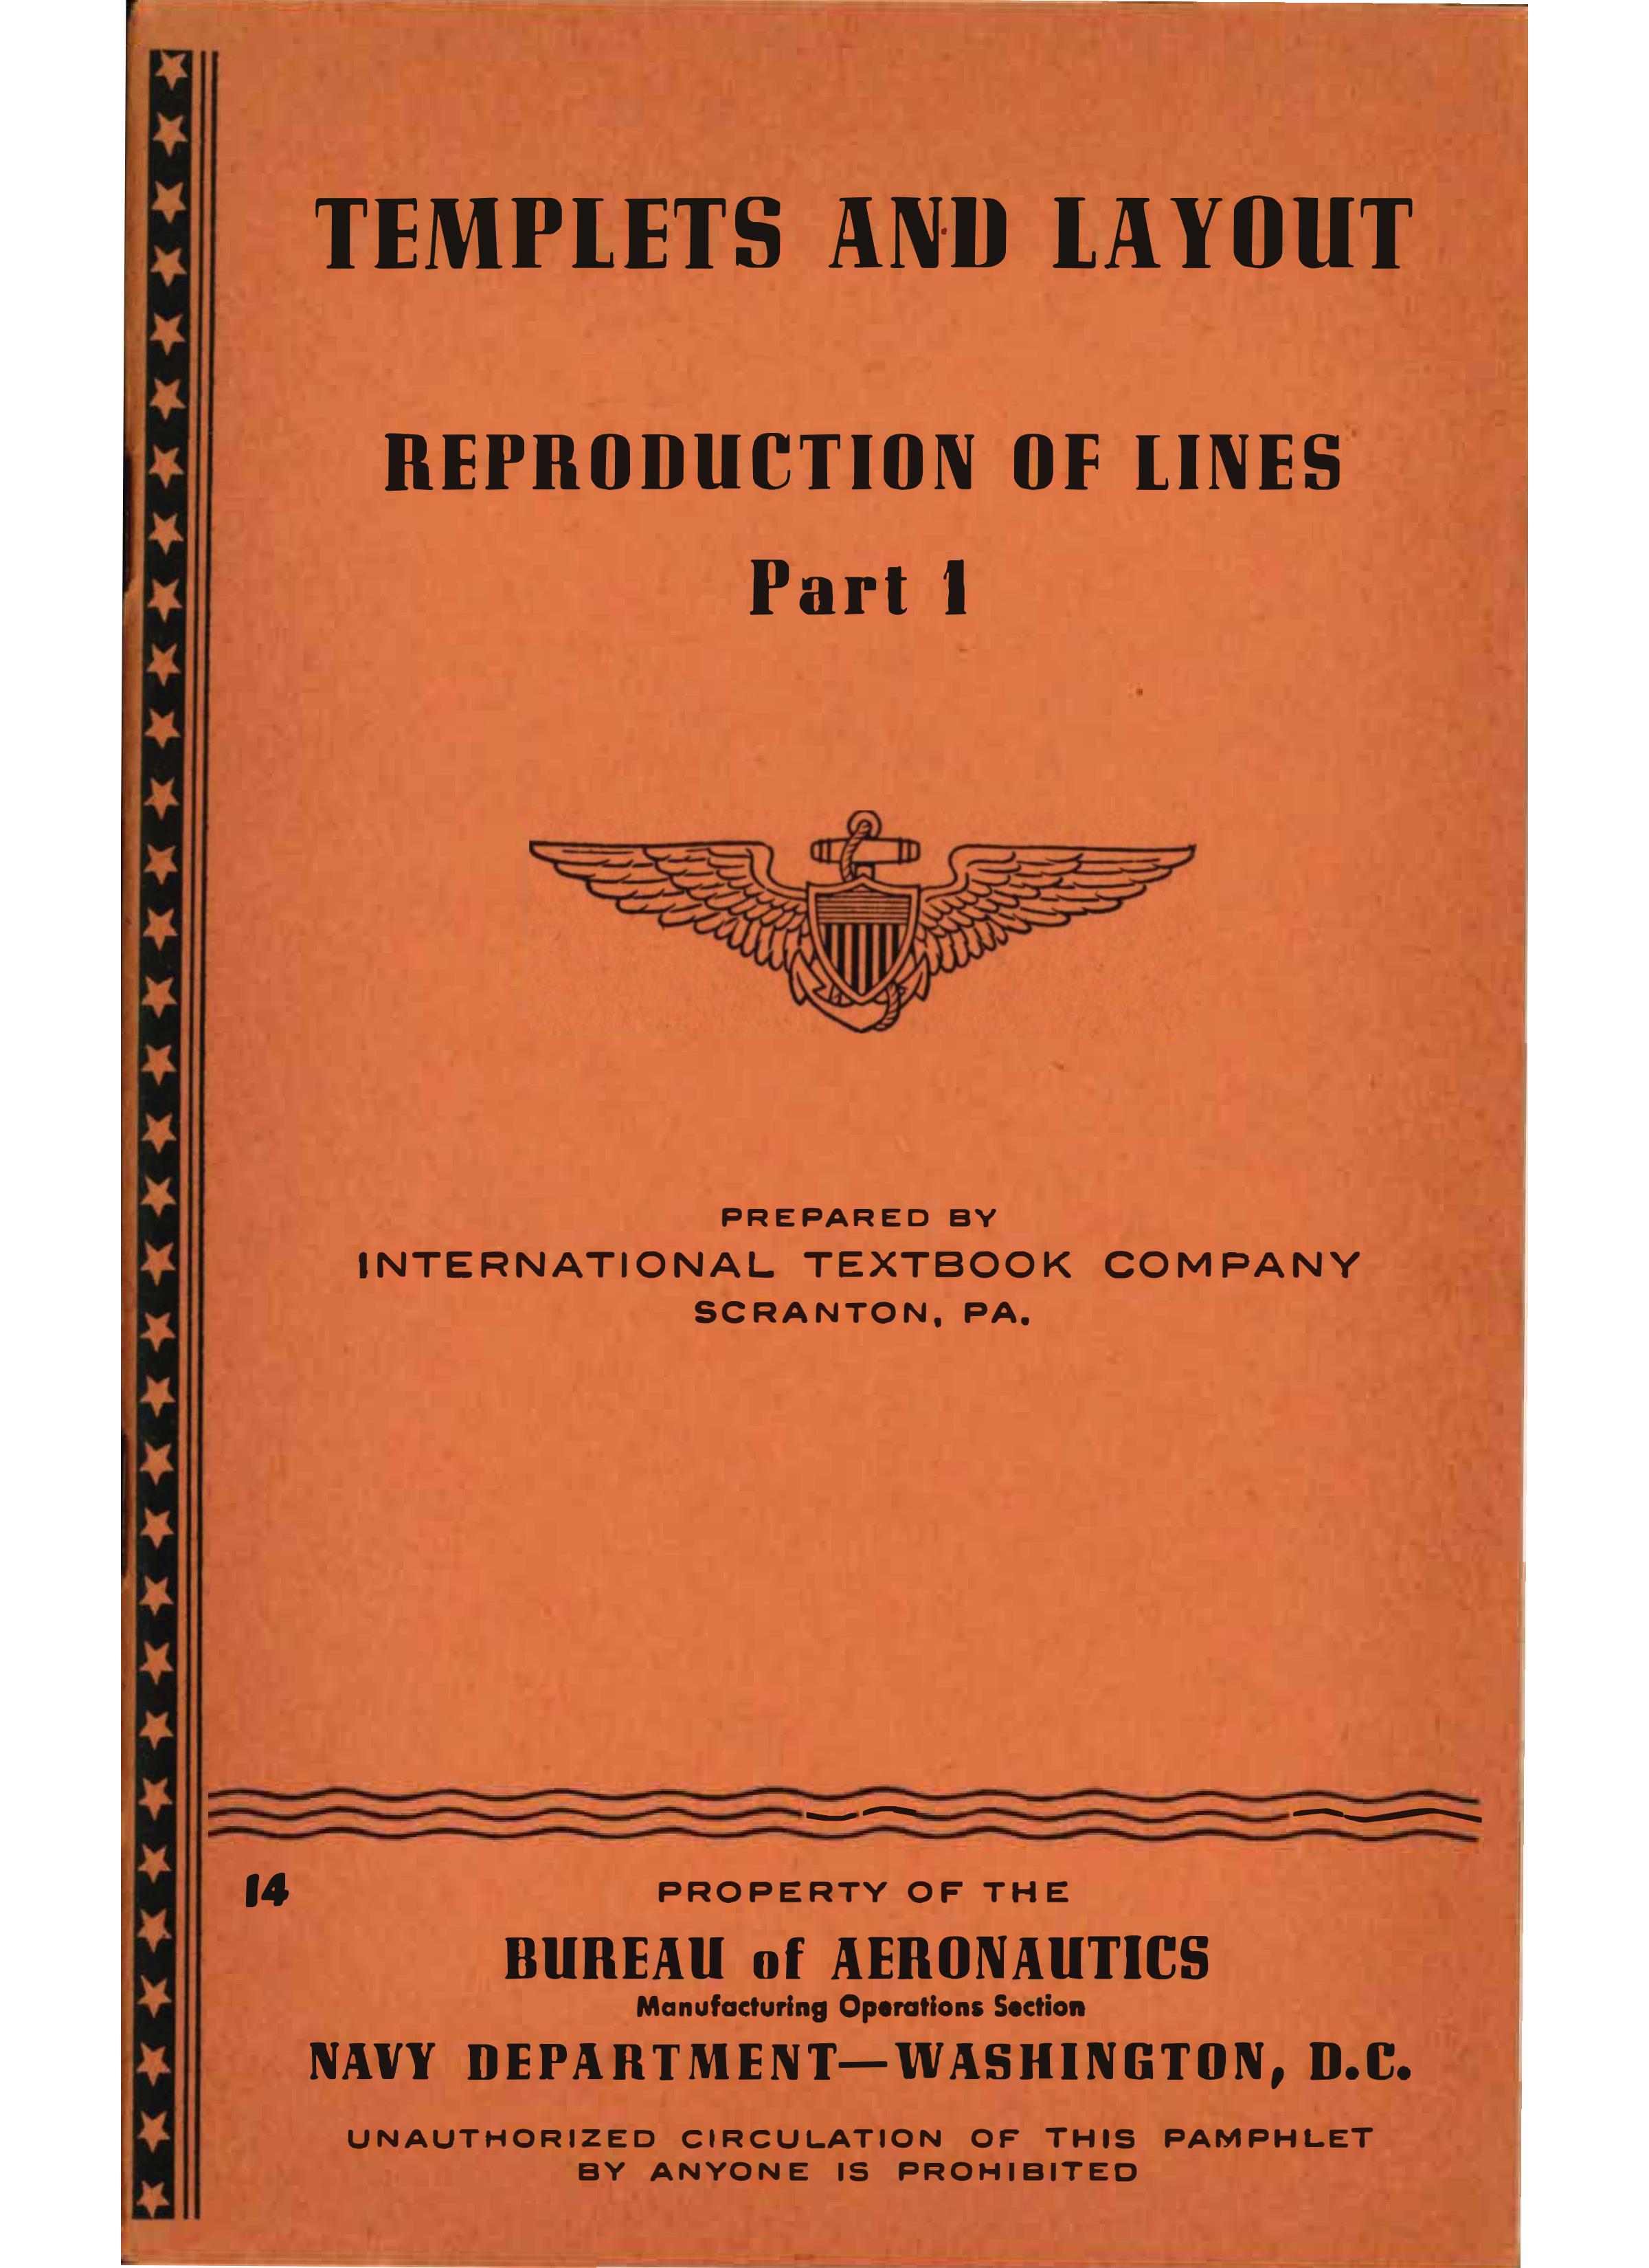 Sample page 1 from AirCorps Library document: Templets and Layout - Reproduction of Lines Part 1 - Bureau of Aeronautics